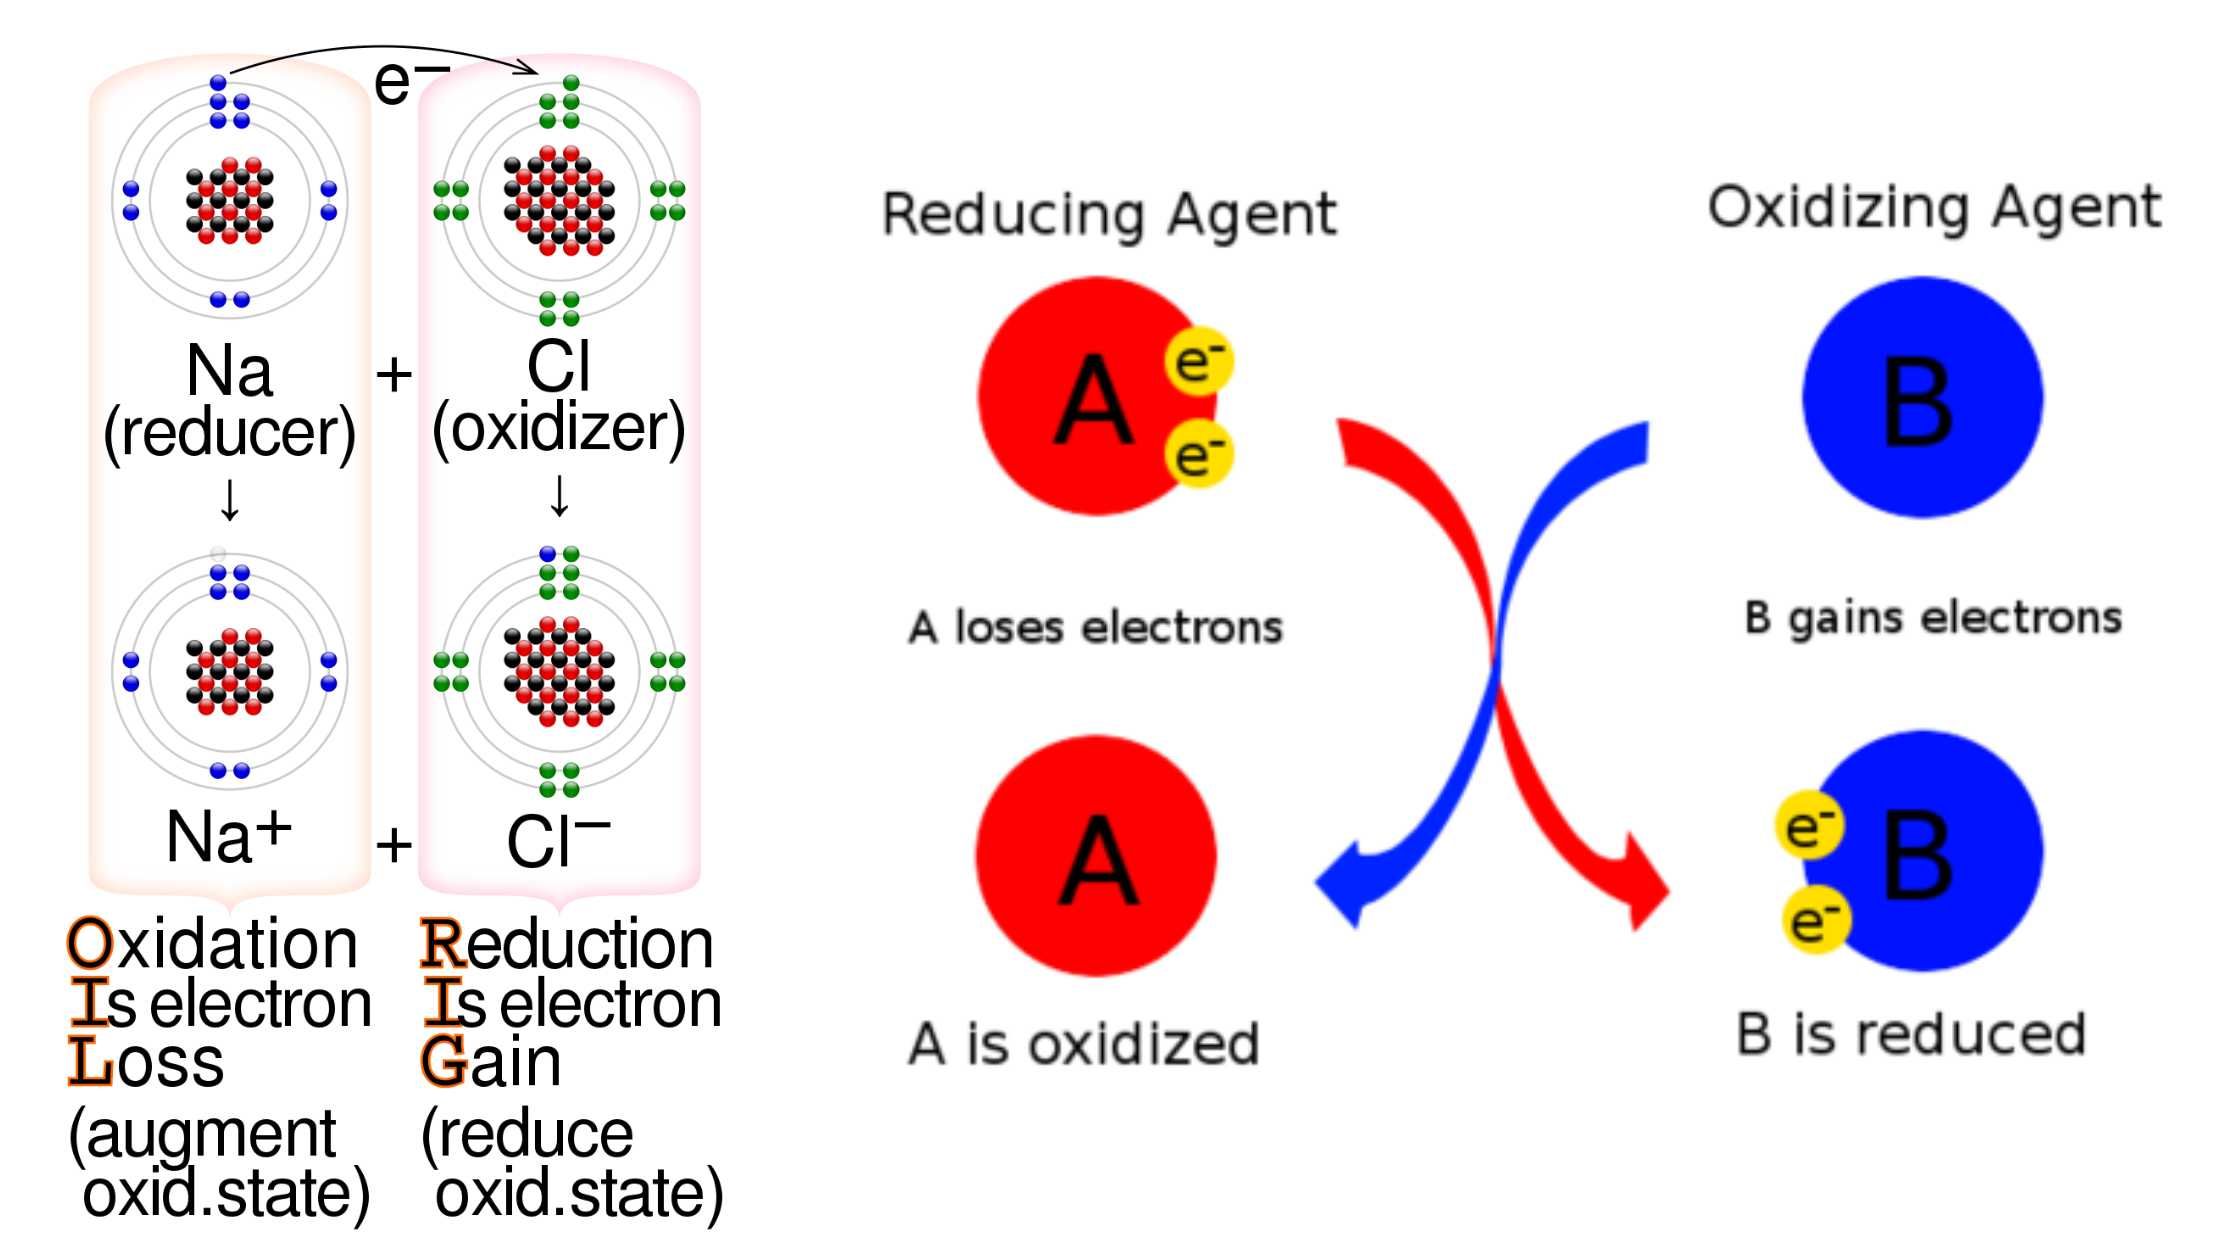 Oxidizing Agent - Definition, Factors, Applications, Examples